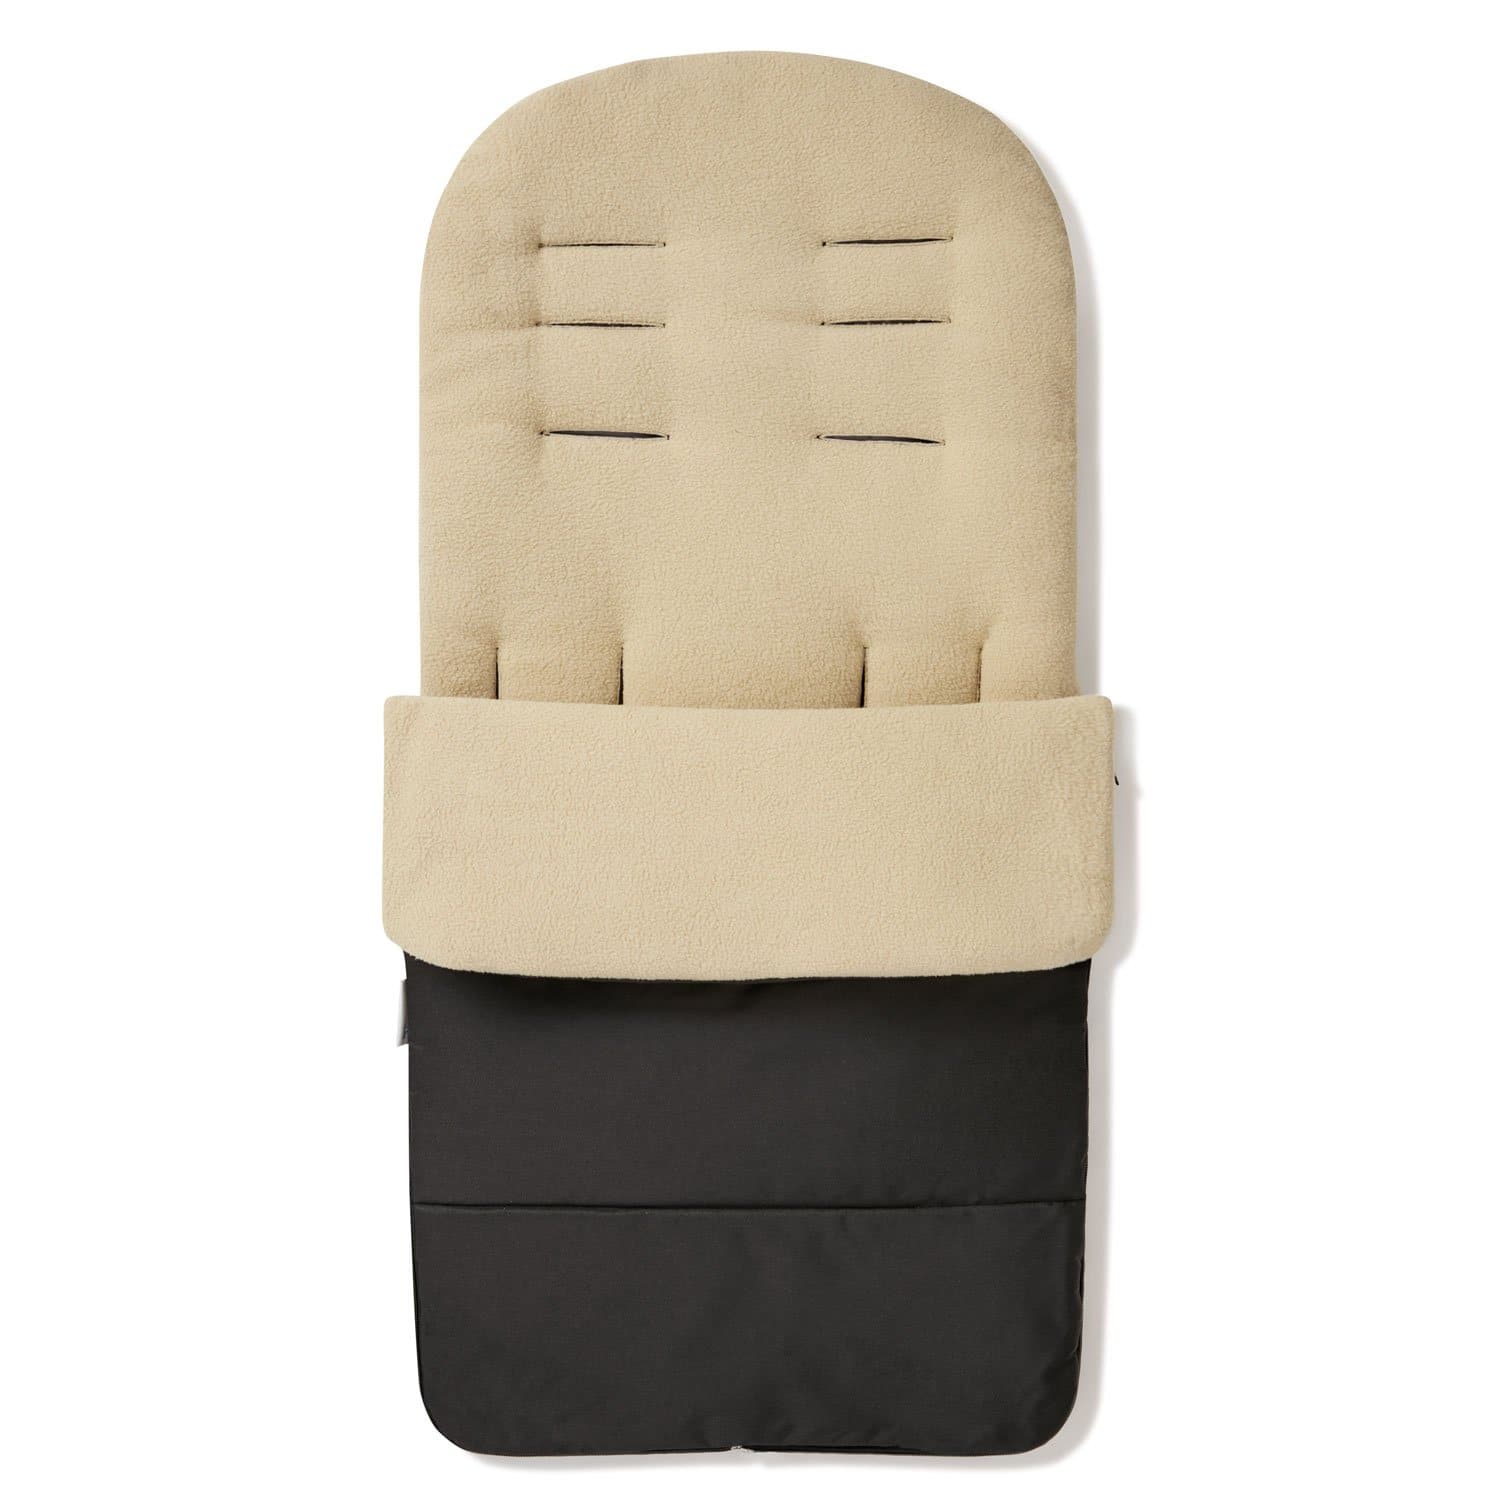 Premium Footmuff / Cosy Toes Compatible with Red Castle - Desert Sand / Fits All Models | For Your Little One